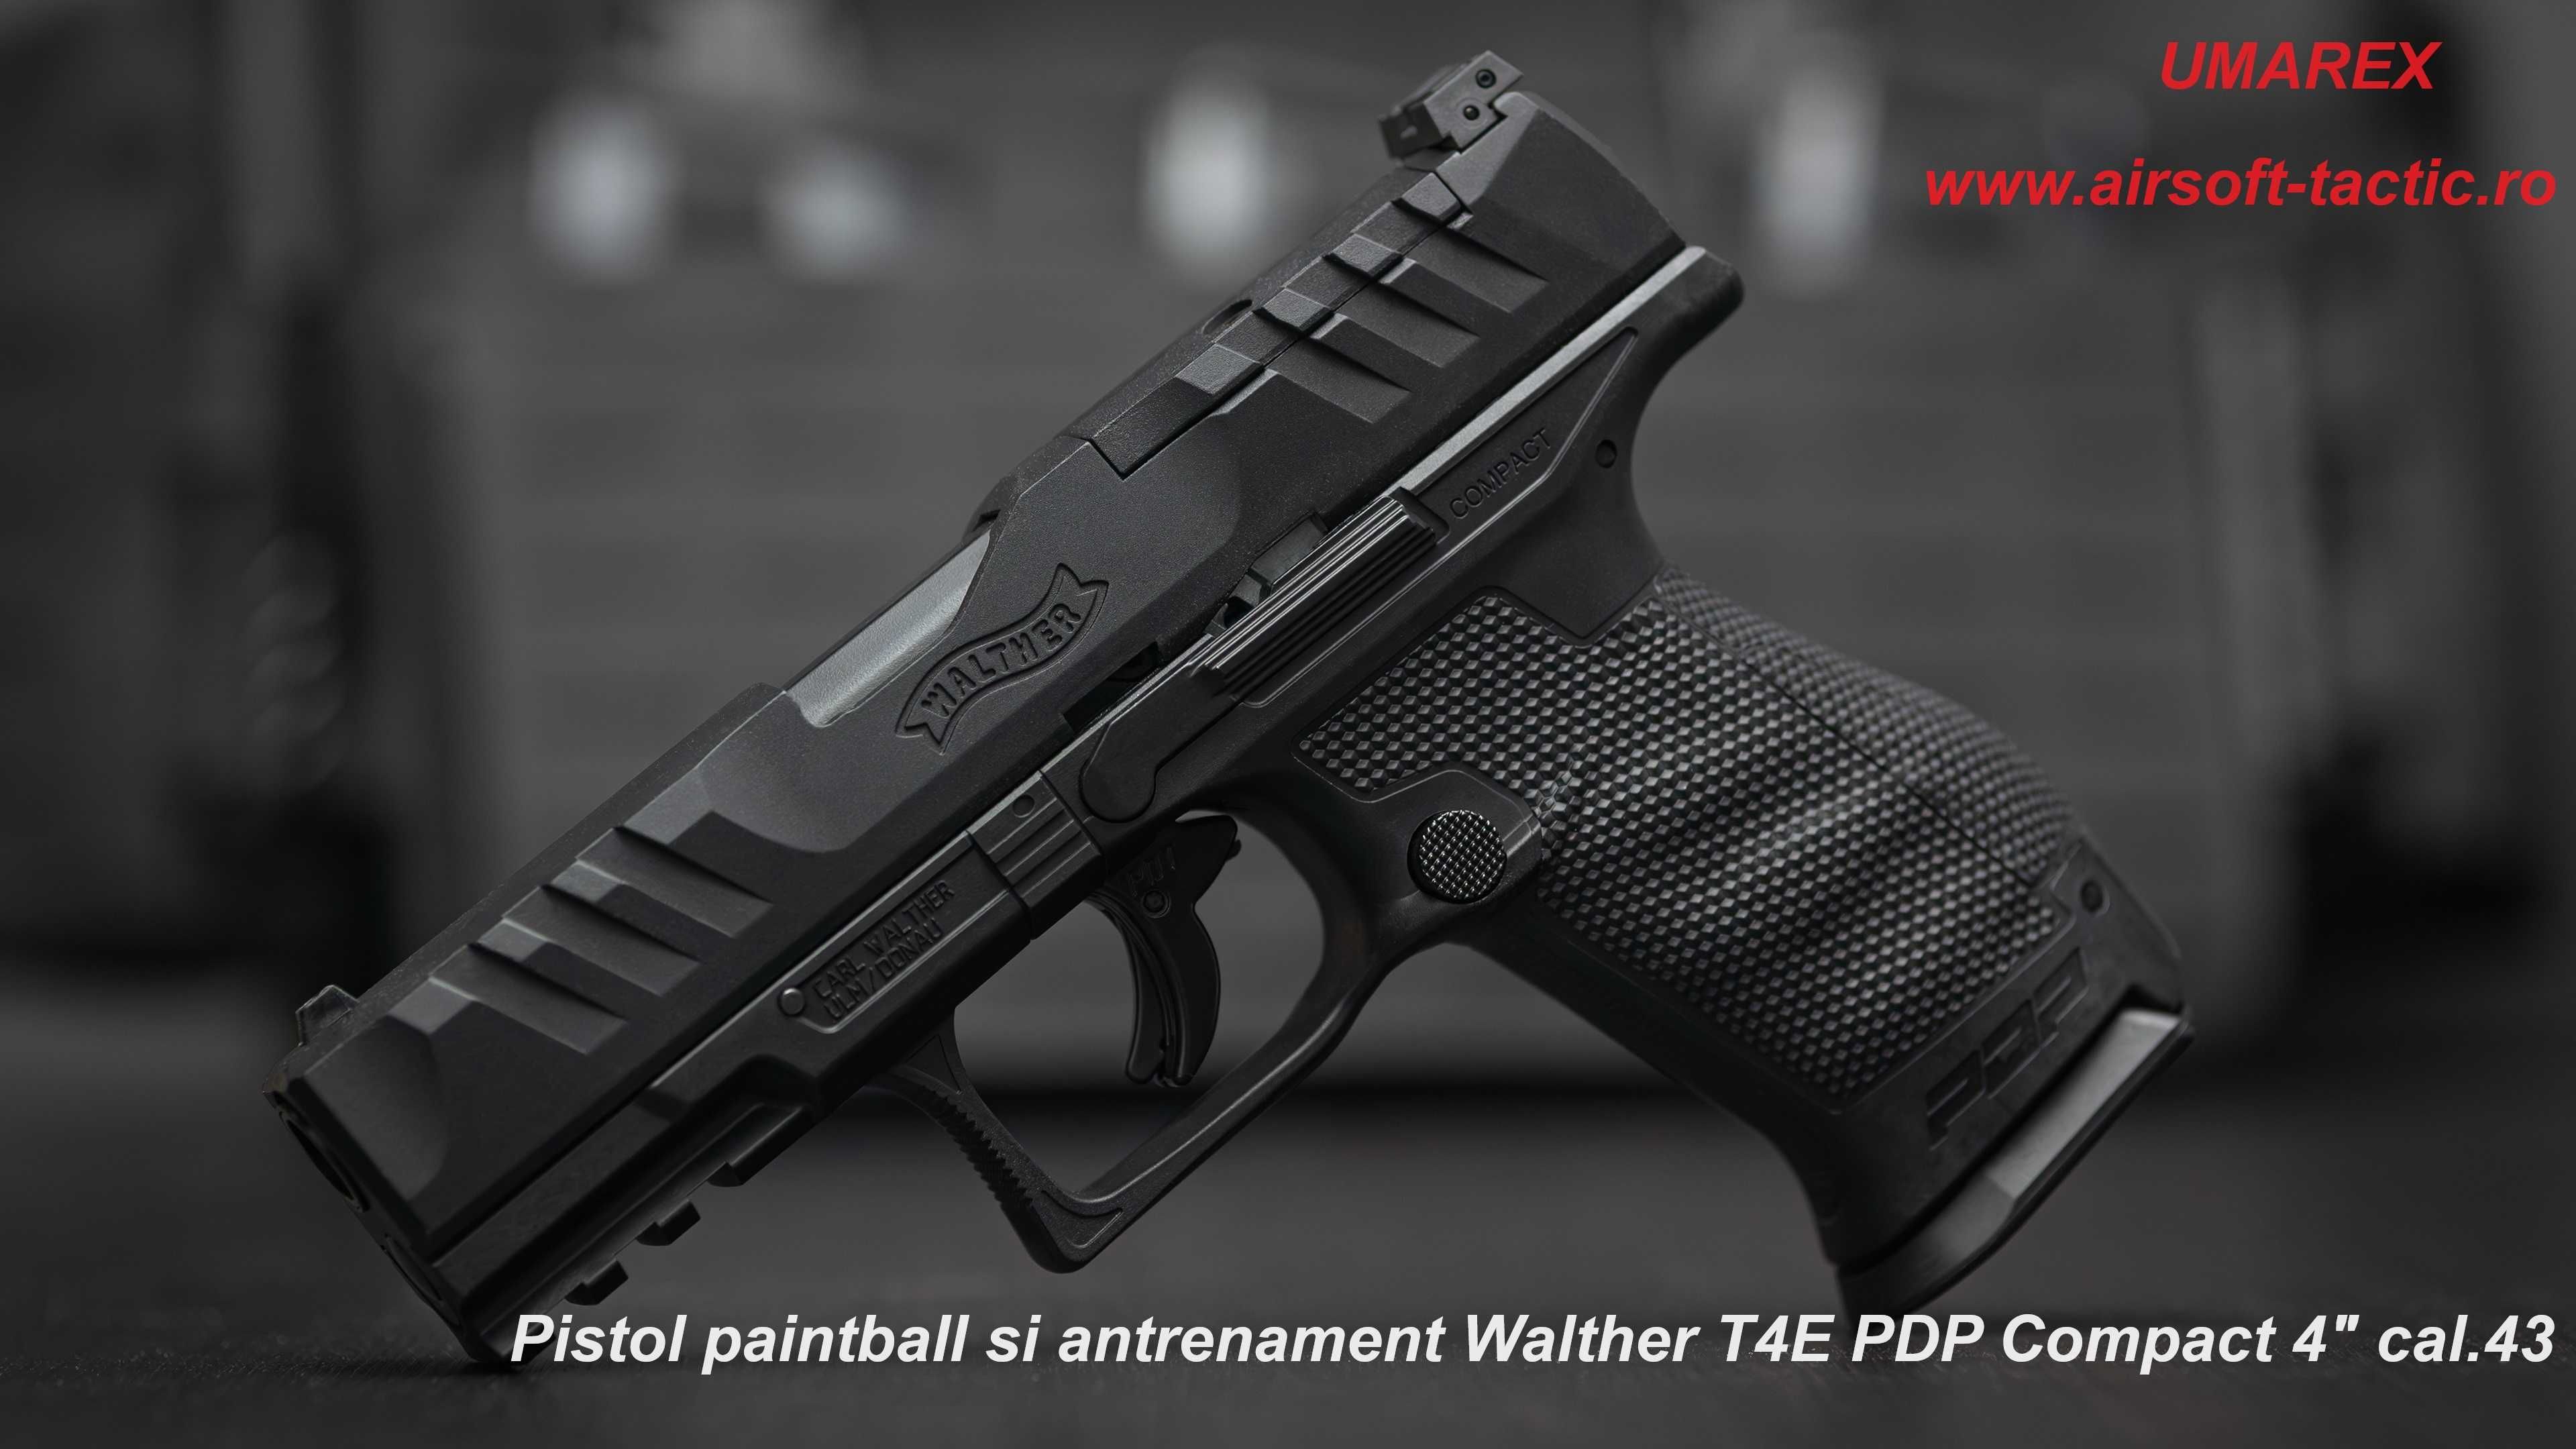 Pistol paintball si antrenament Walther T4E PDP Compact 4" cal.43